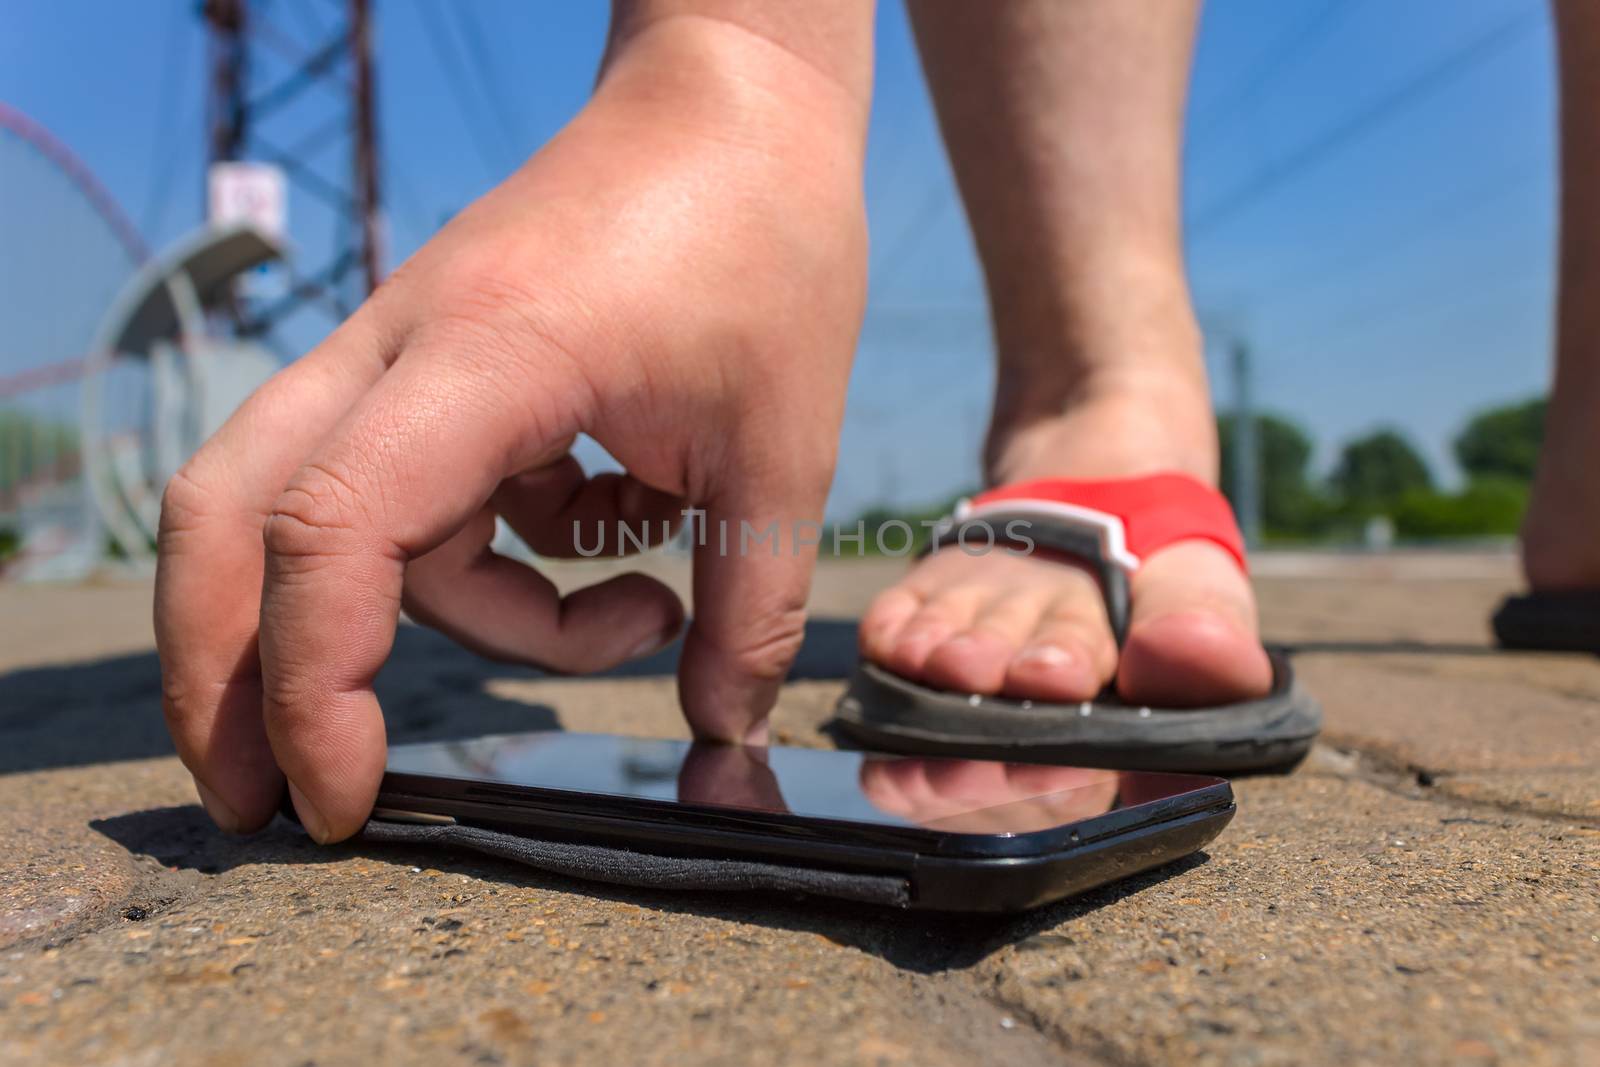 A man picks up a mobile phone that fell on the road in a public park in the summer